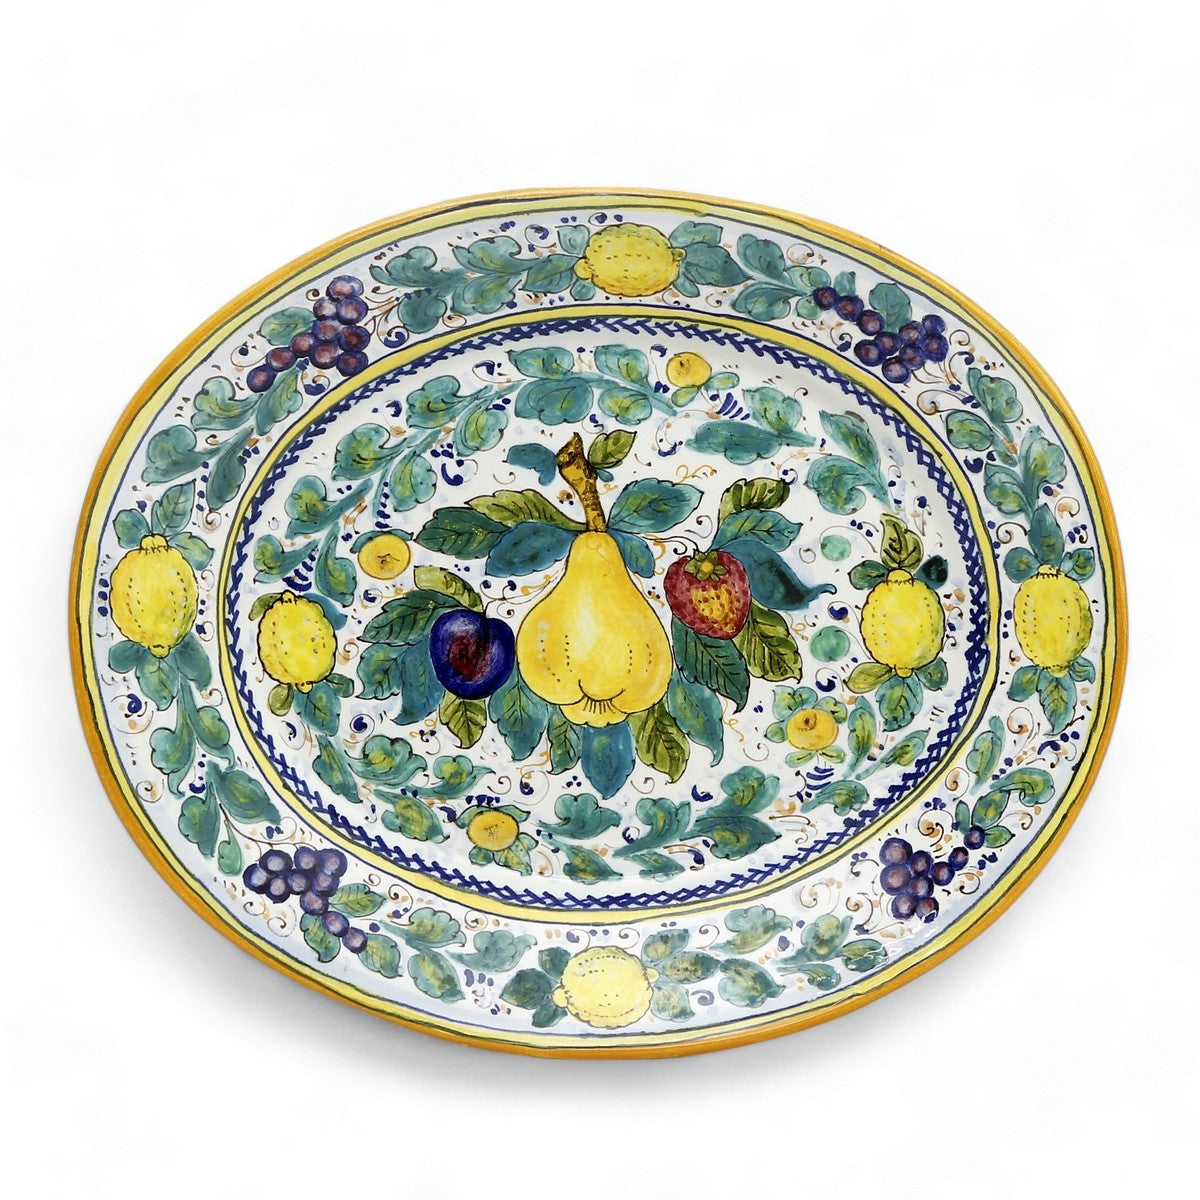 TUSCAN MAJOLICA: Large Oval Platter adorned with assorted fruits and Teal Green foliage